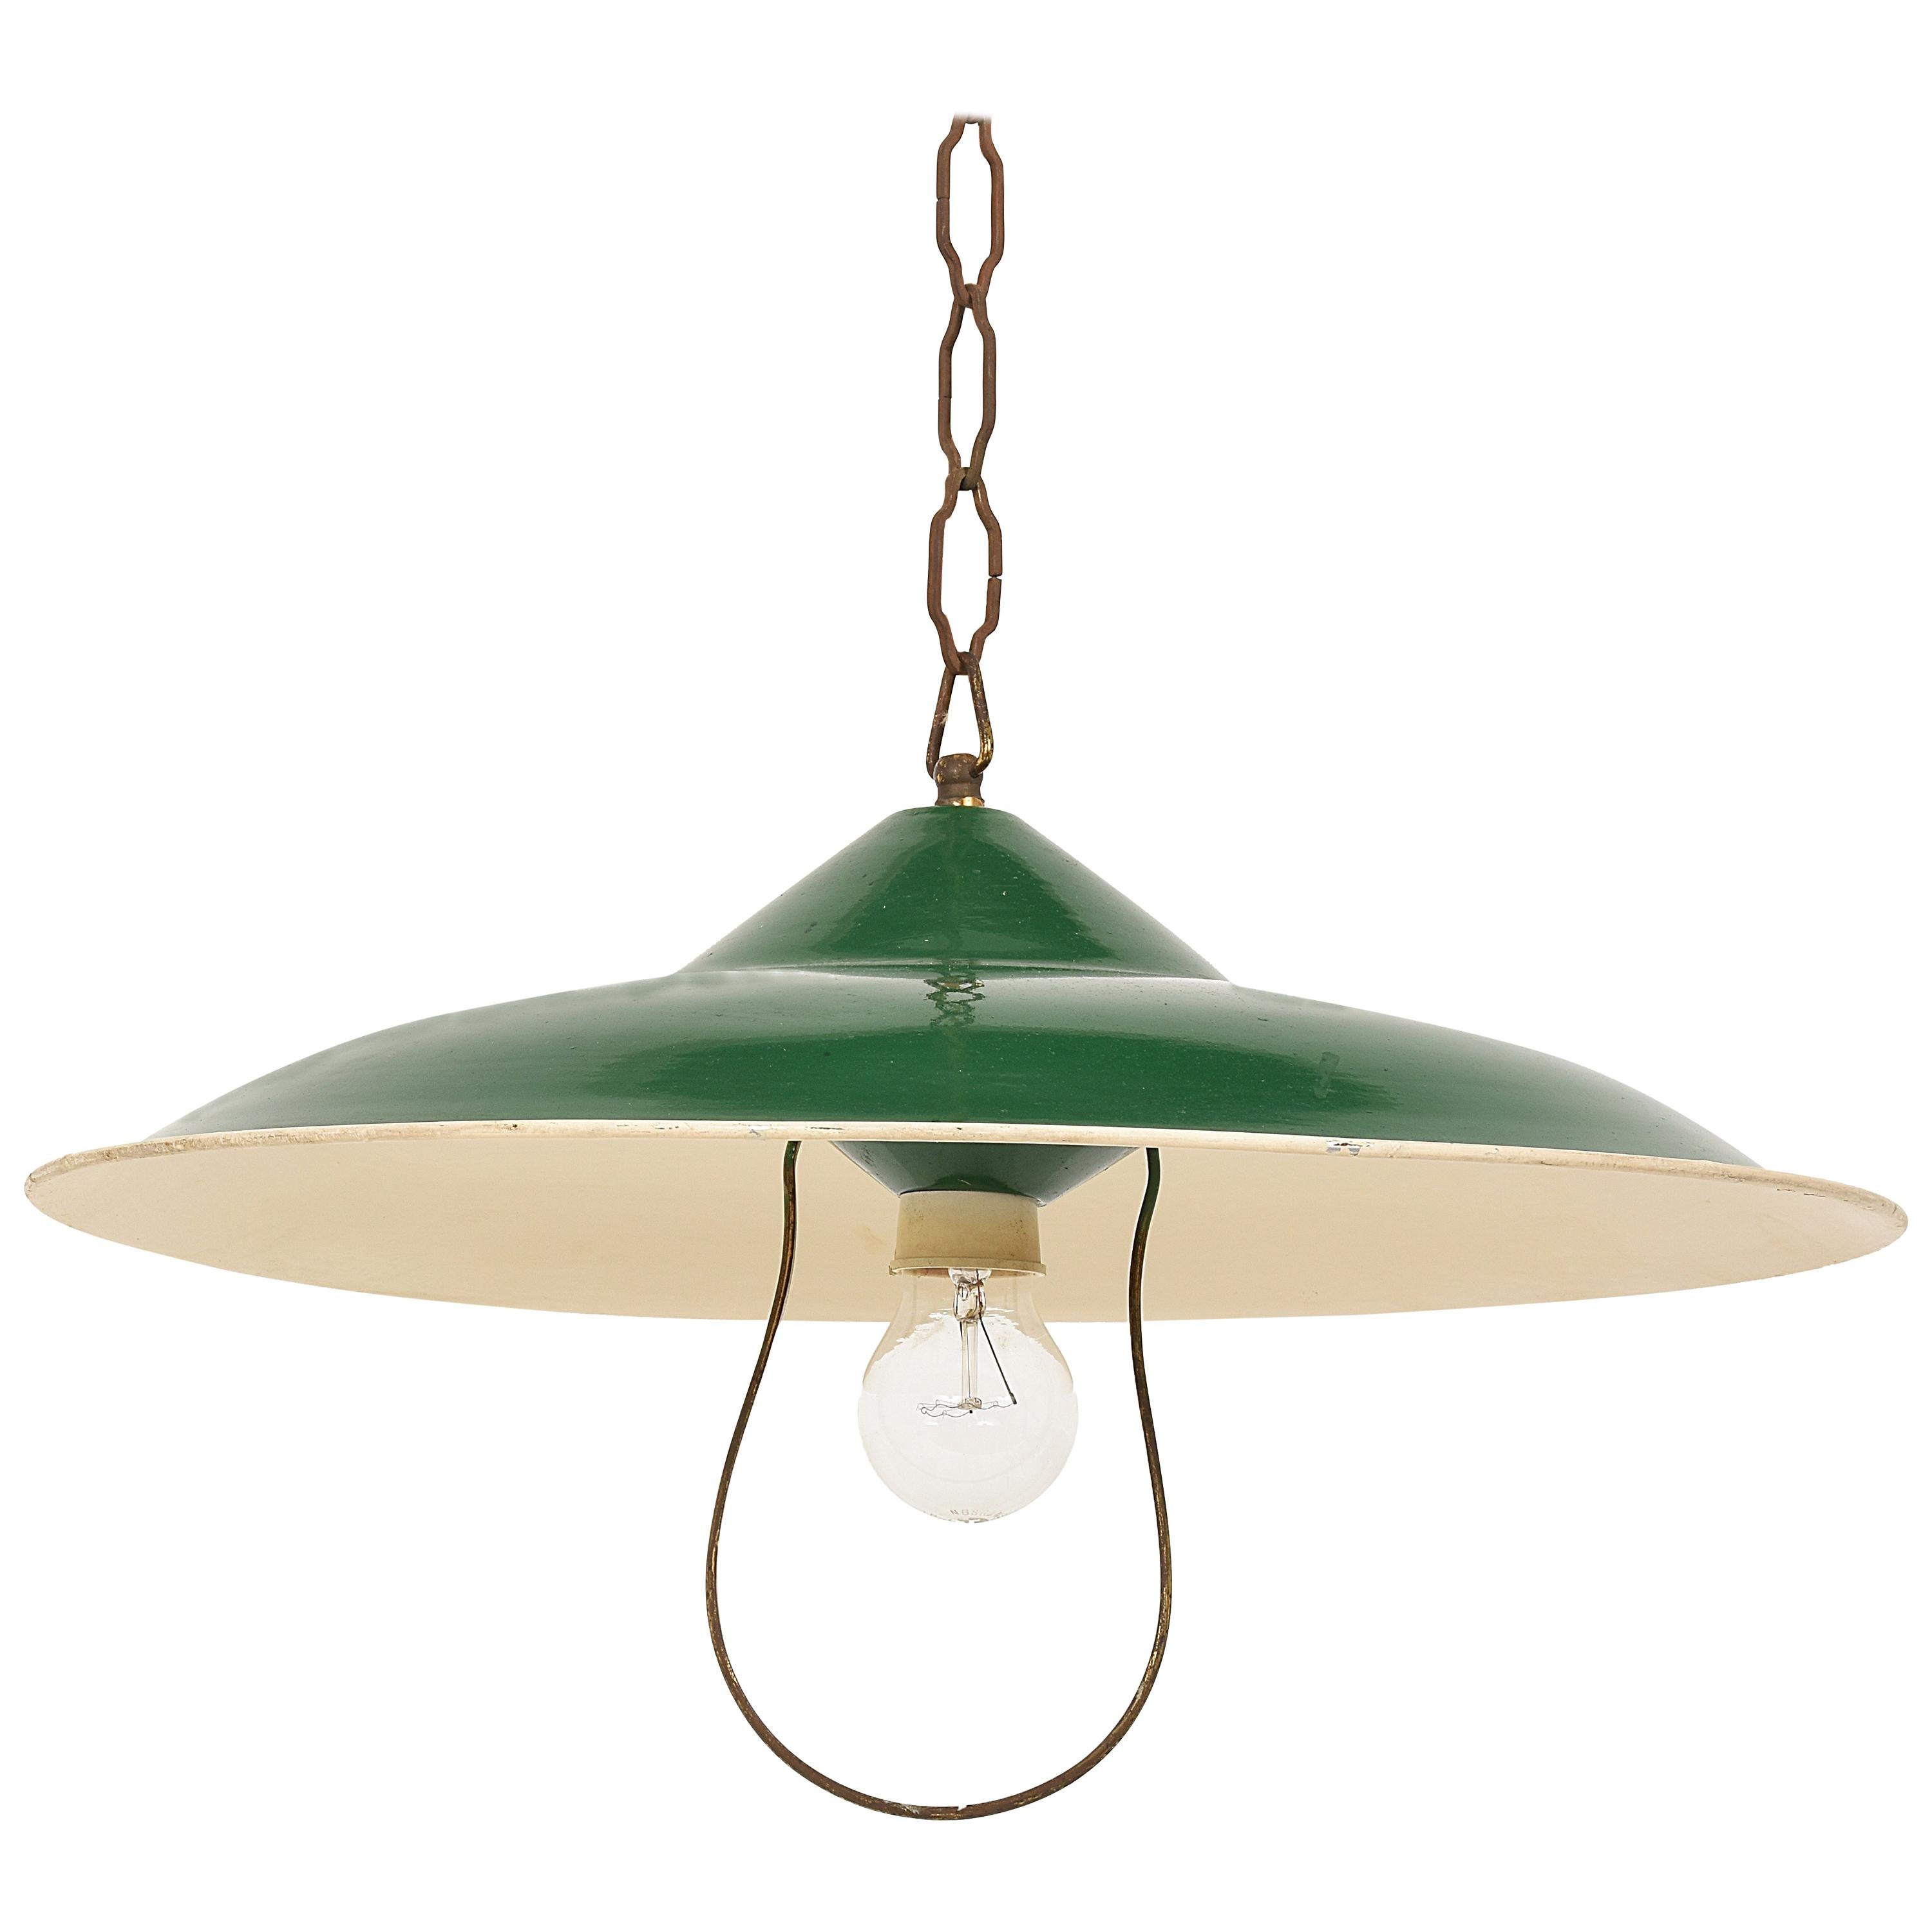 Chandelier in Green Glazed Metal Pendant Italy, Industrial Style of the 1950s For Sale